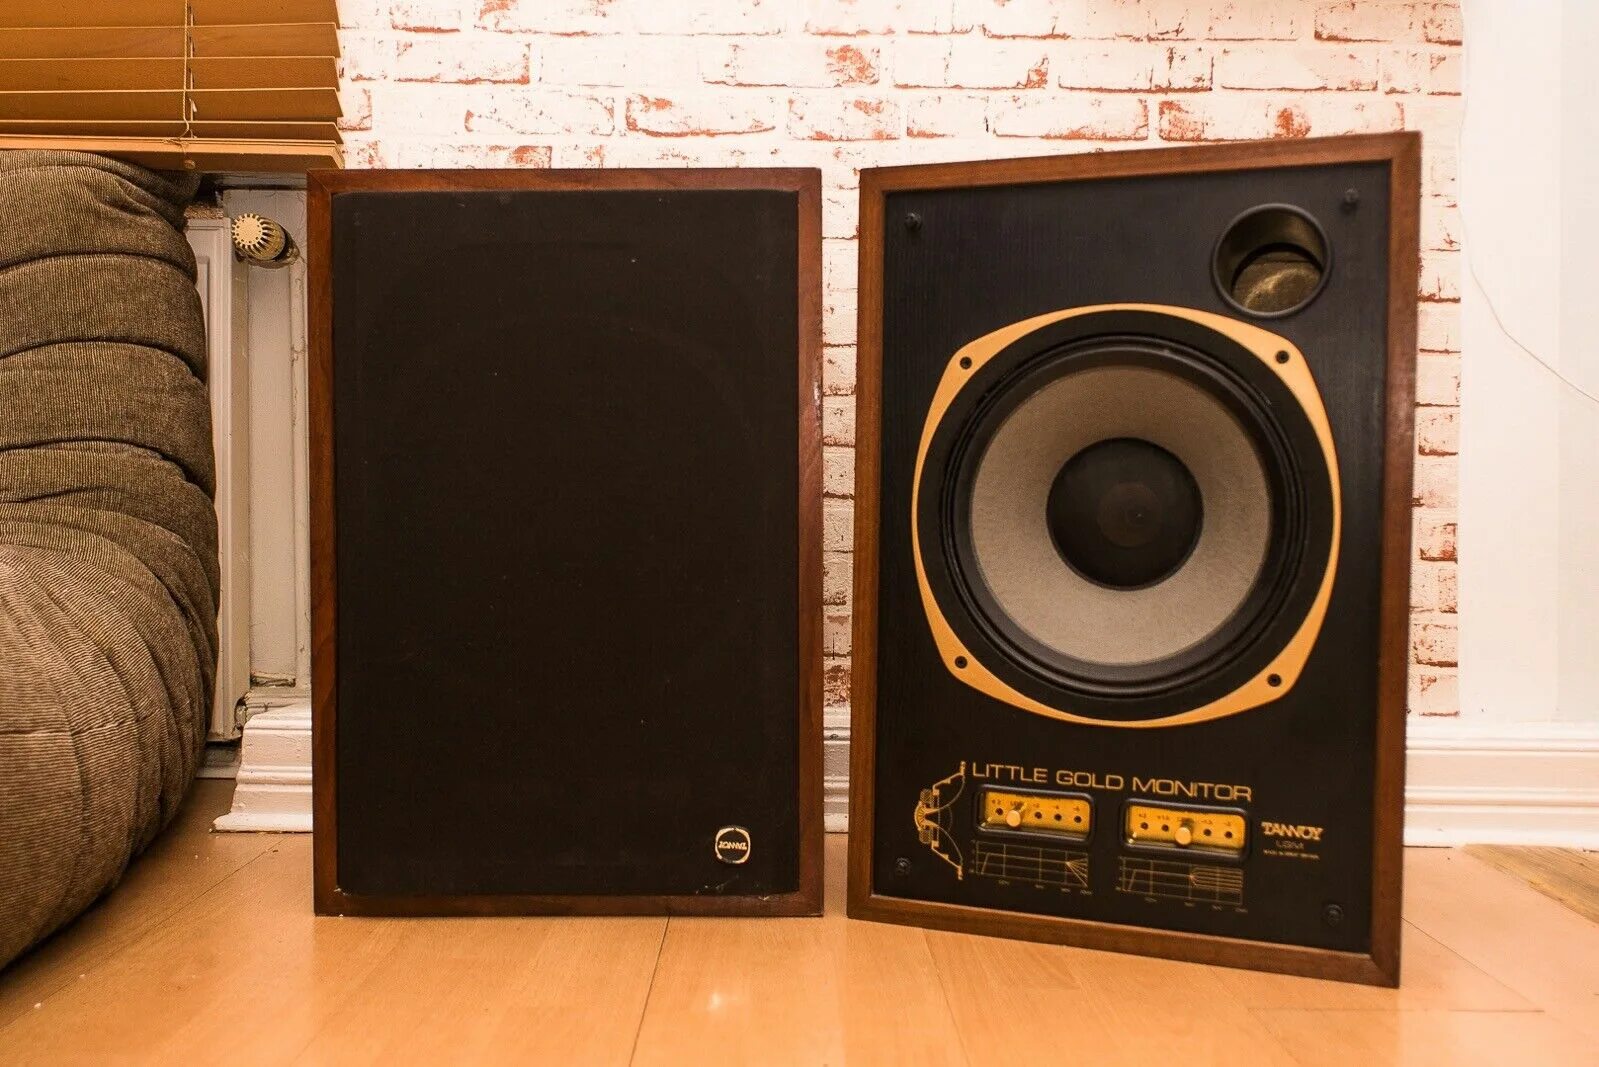 Tannoy Monitor Gold 10. Tannoy little Gold Monitor. Tannoy Monitor Gold 12. Tannoy super Gold Monitor 15.